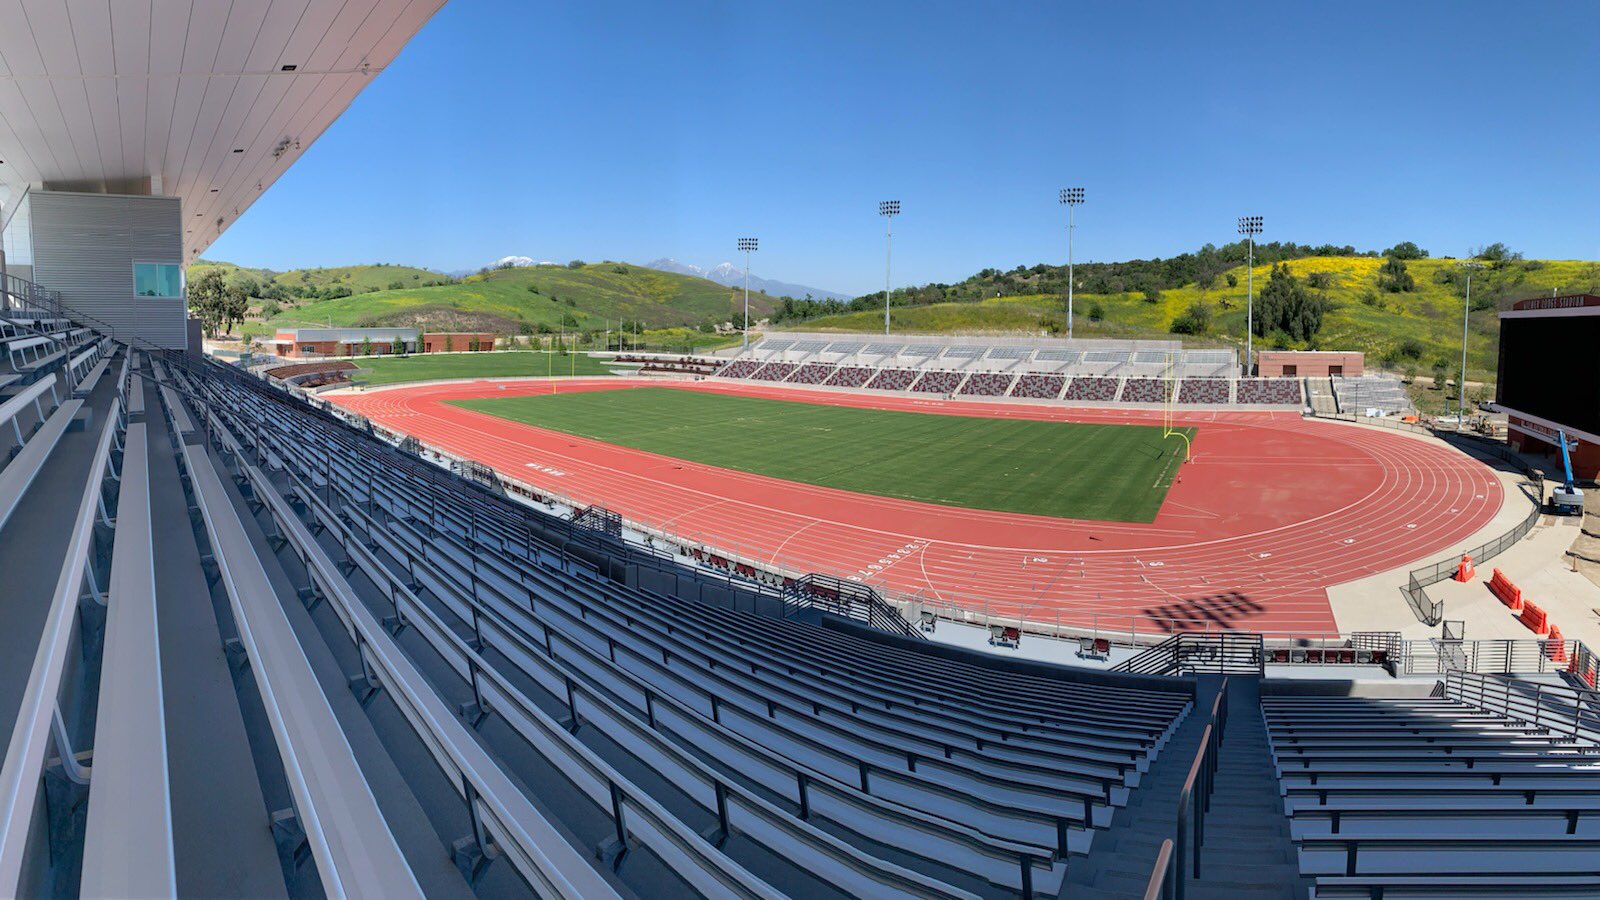 Don’t miss the 63rd Annual Mt. SAC Relays from April 12-15, 2023. Watch live on RunnerSpace.com +PLUS and catch top athletes in action. On-demand videos and live results available.